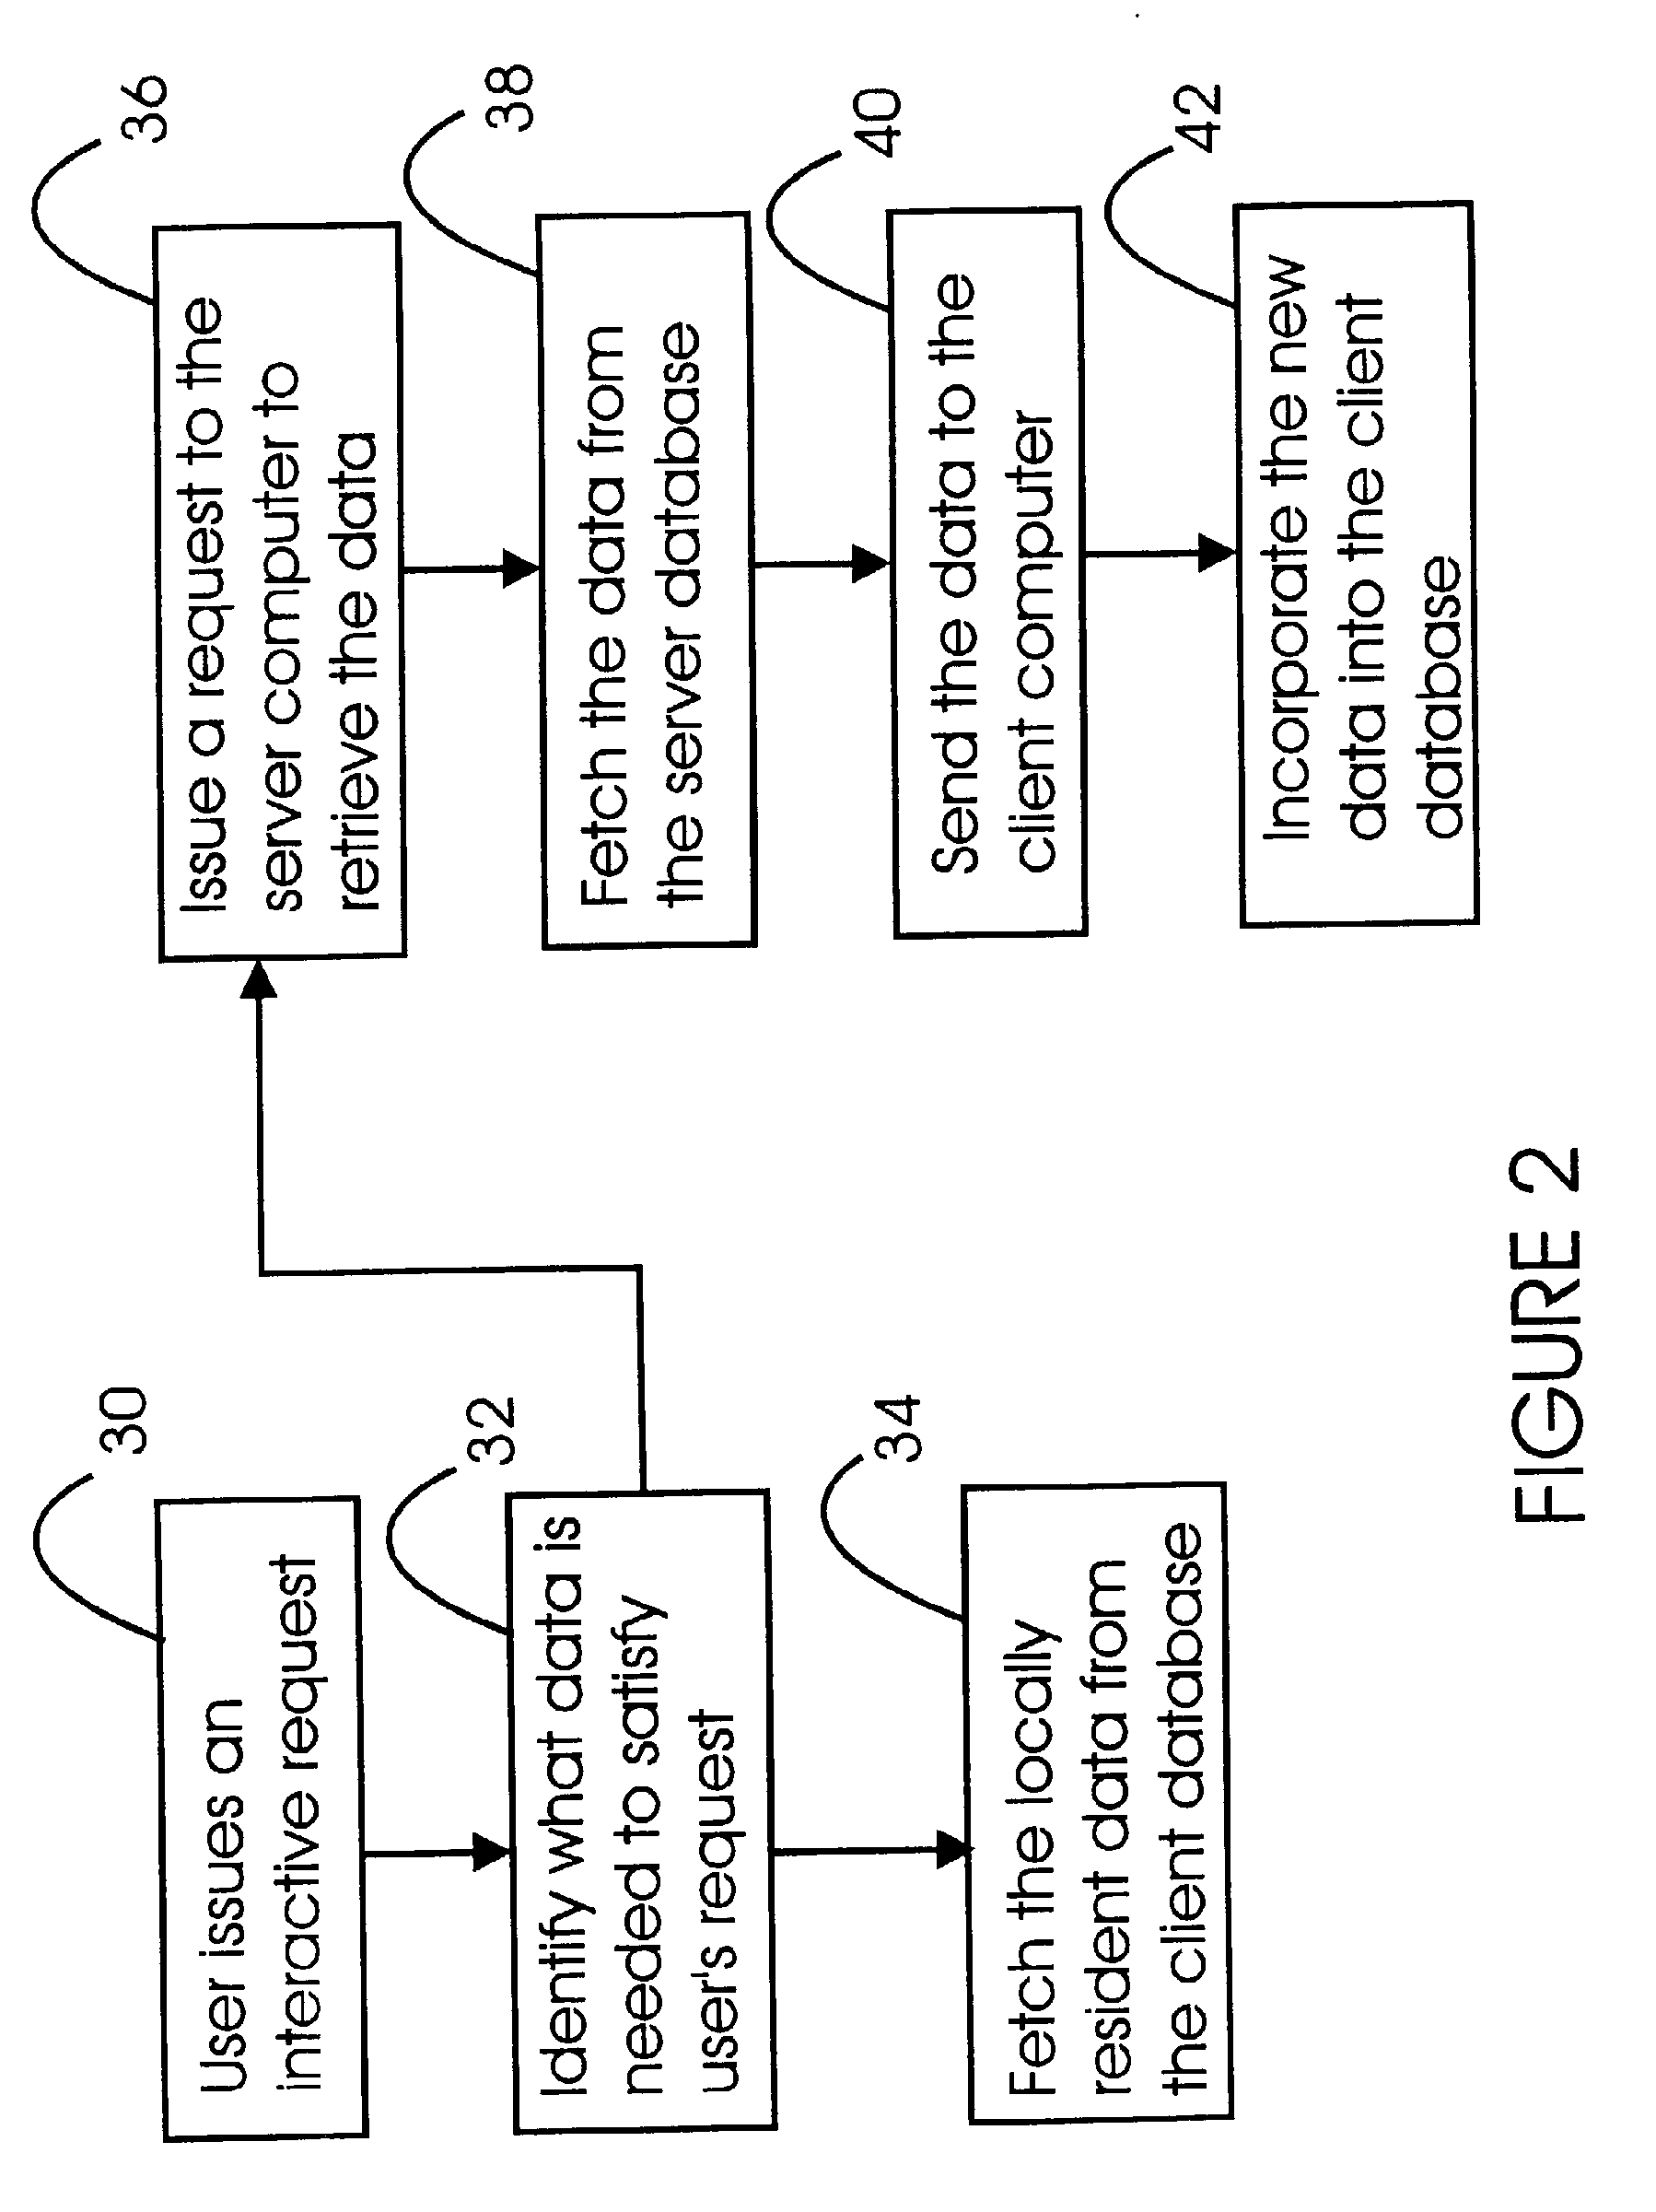 Method and system for providing on-line interactivity over a server-client network